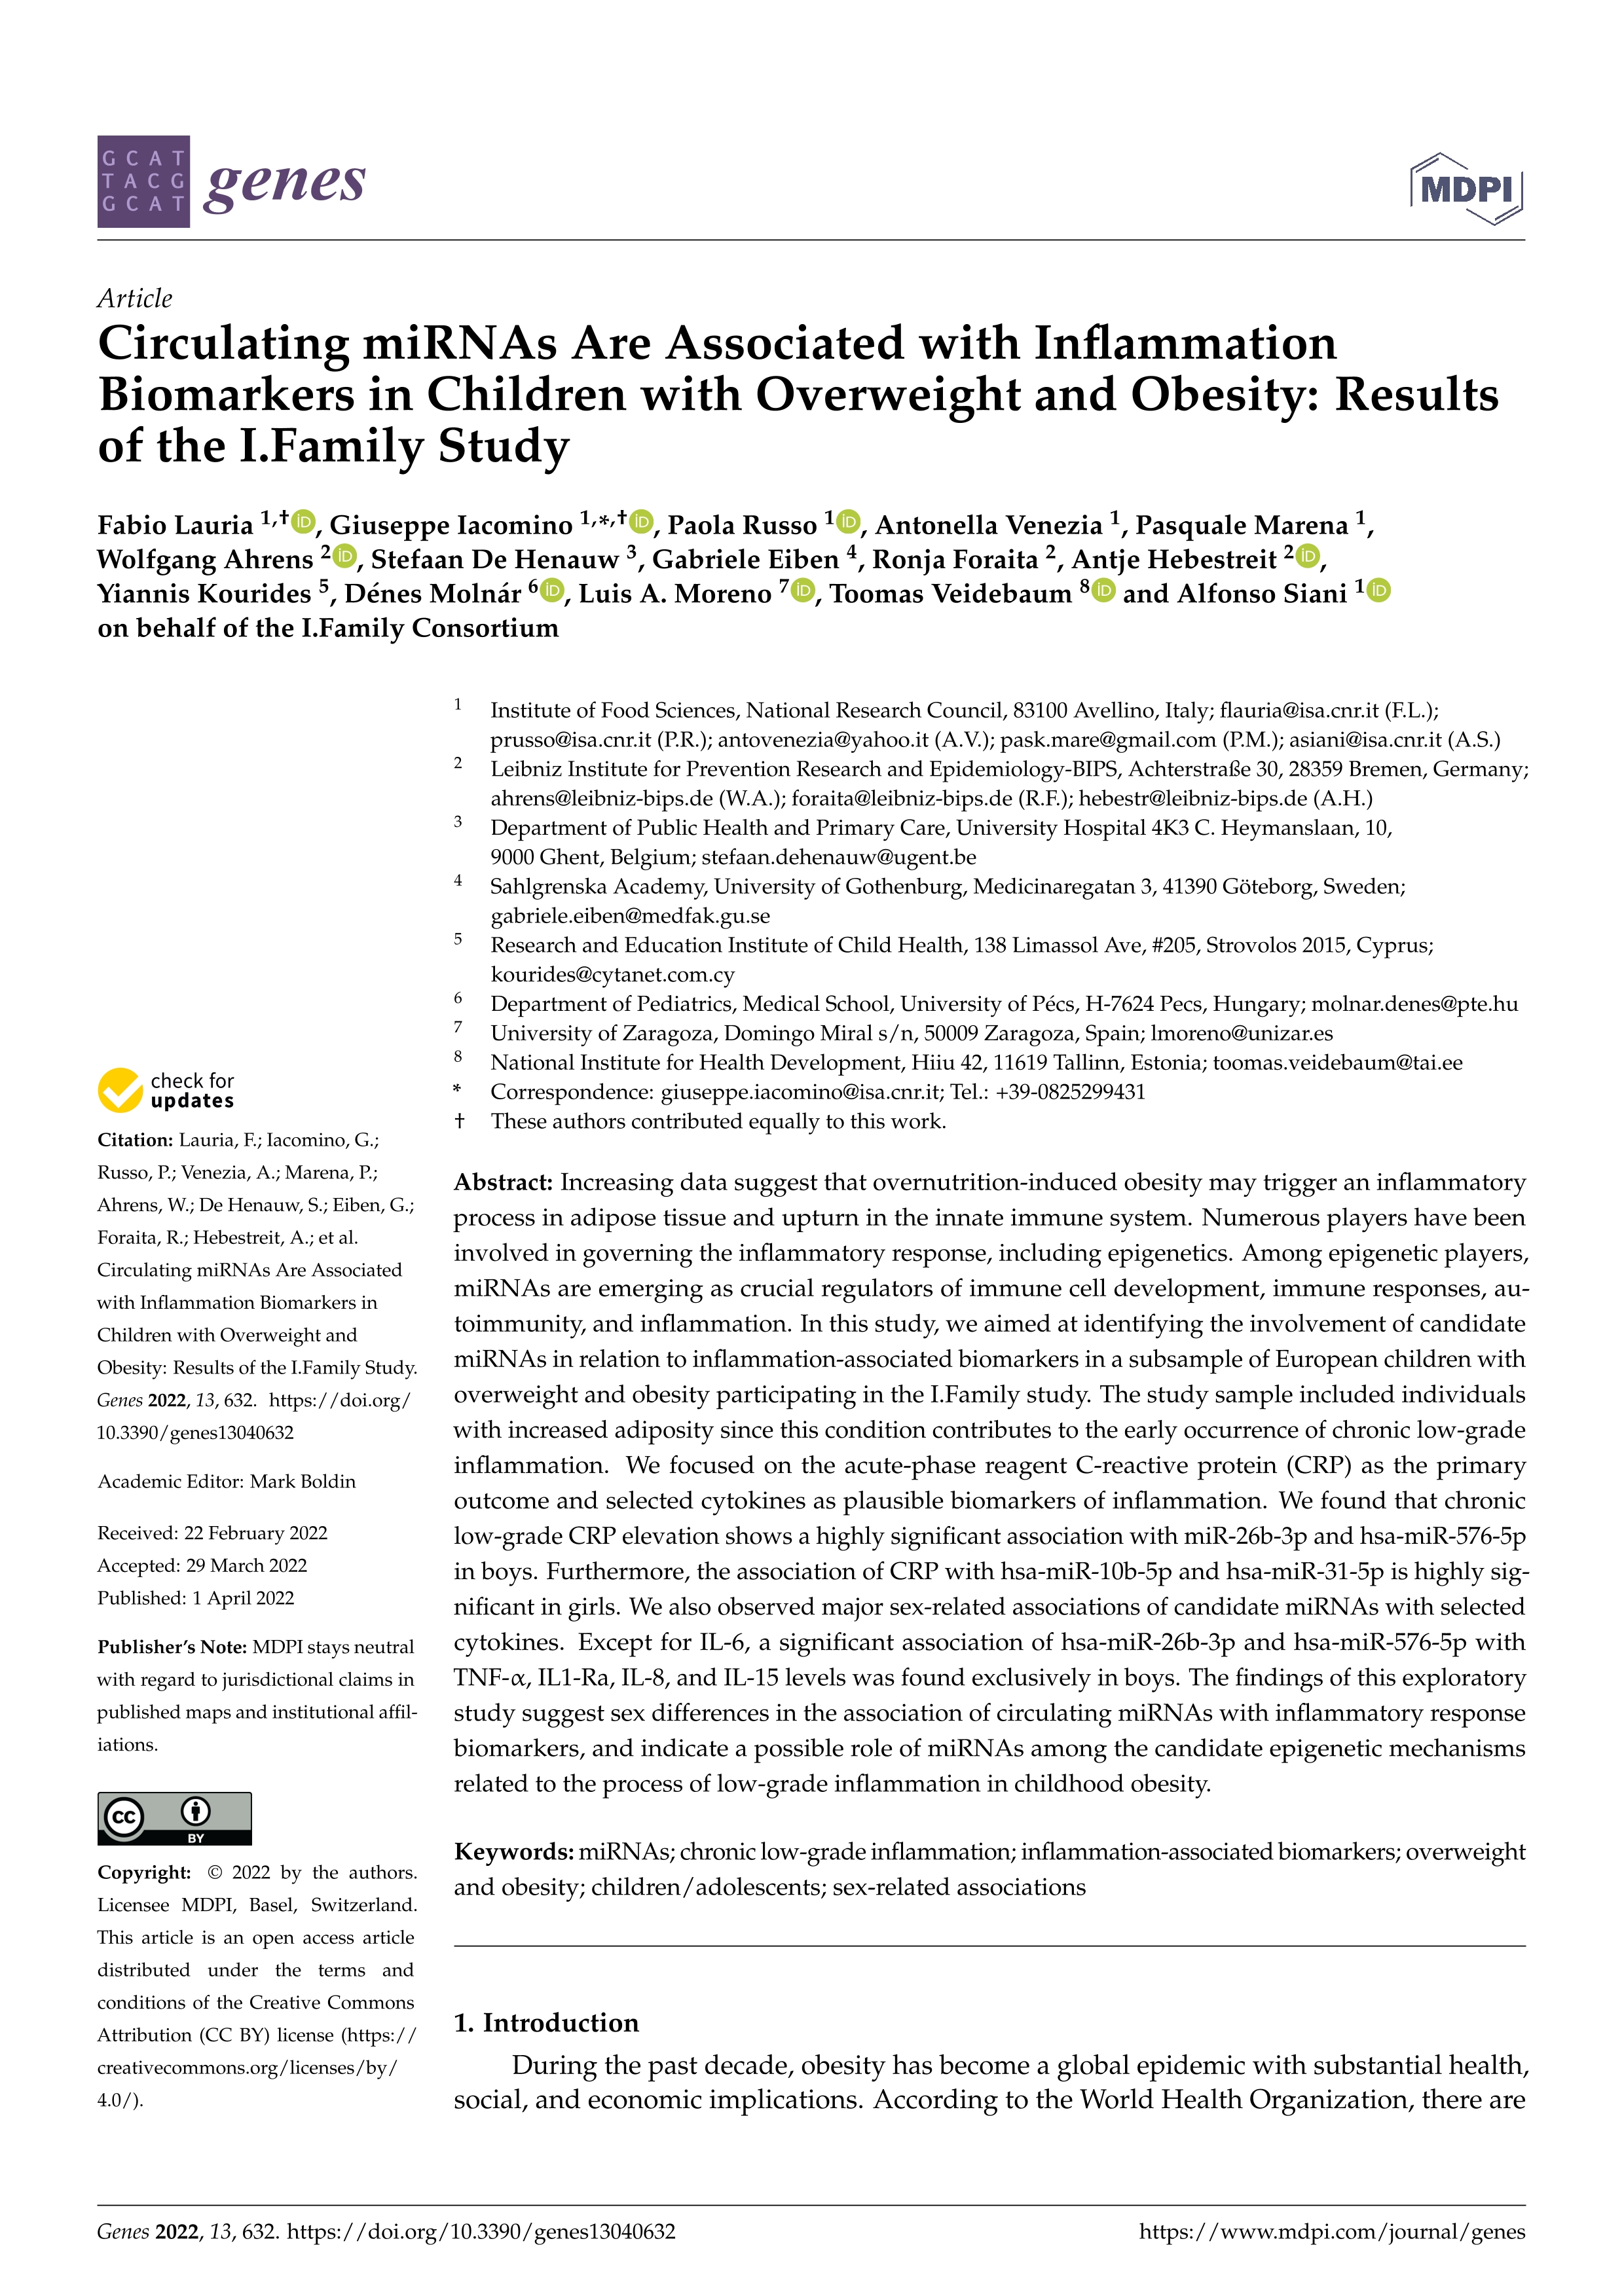 Circulating miRNAs are associated with inflammation biomarkers in children with overweight and obesity: results of the I.Family Study